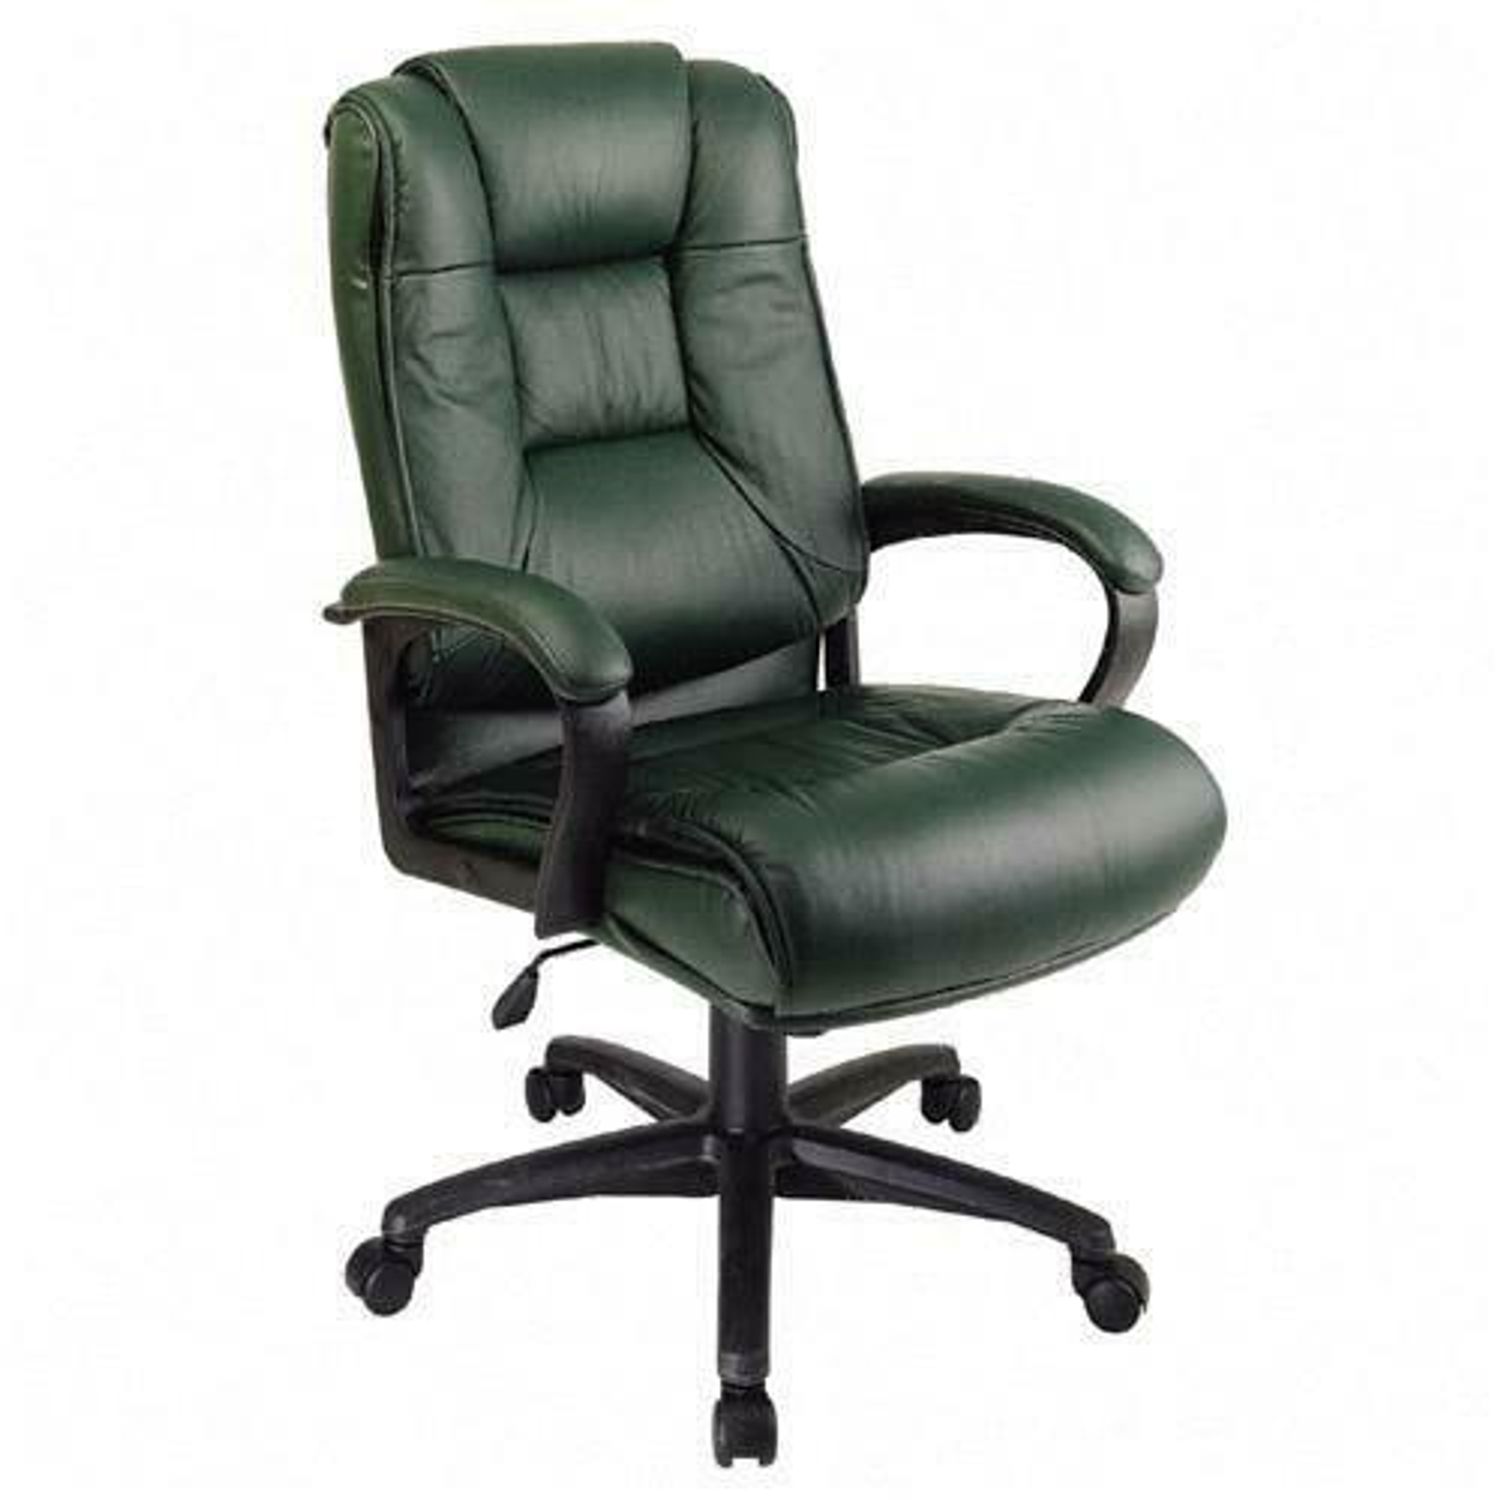 EX5162 Deluxe High Back Executive Leather Chair Green Leather Seat, Leather Back, 5-star Base, 1 Each